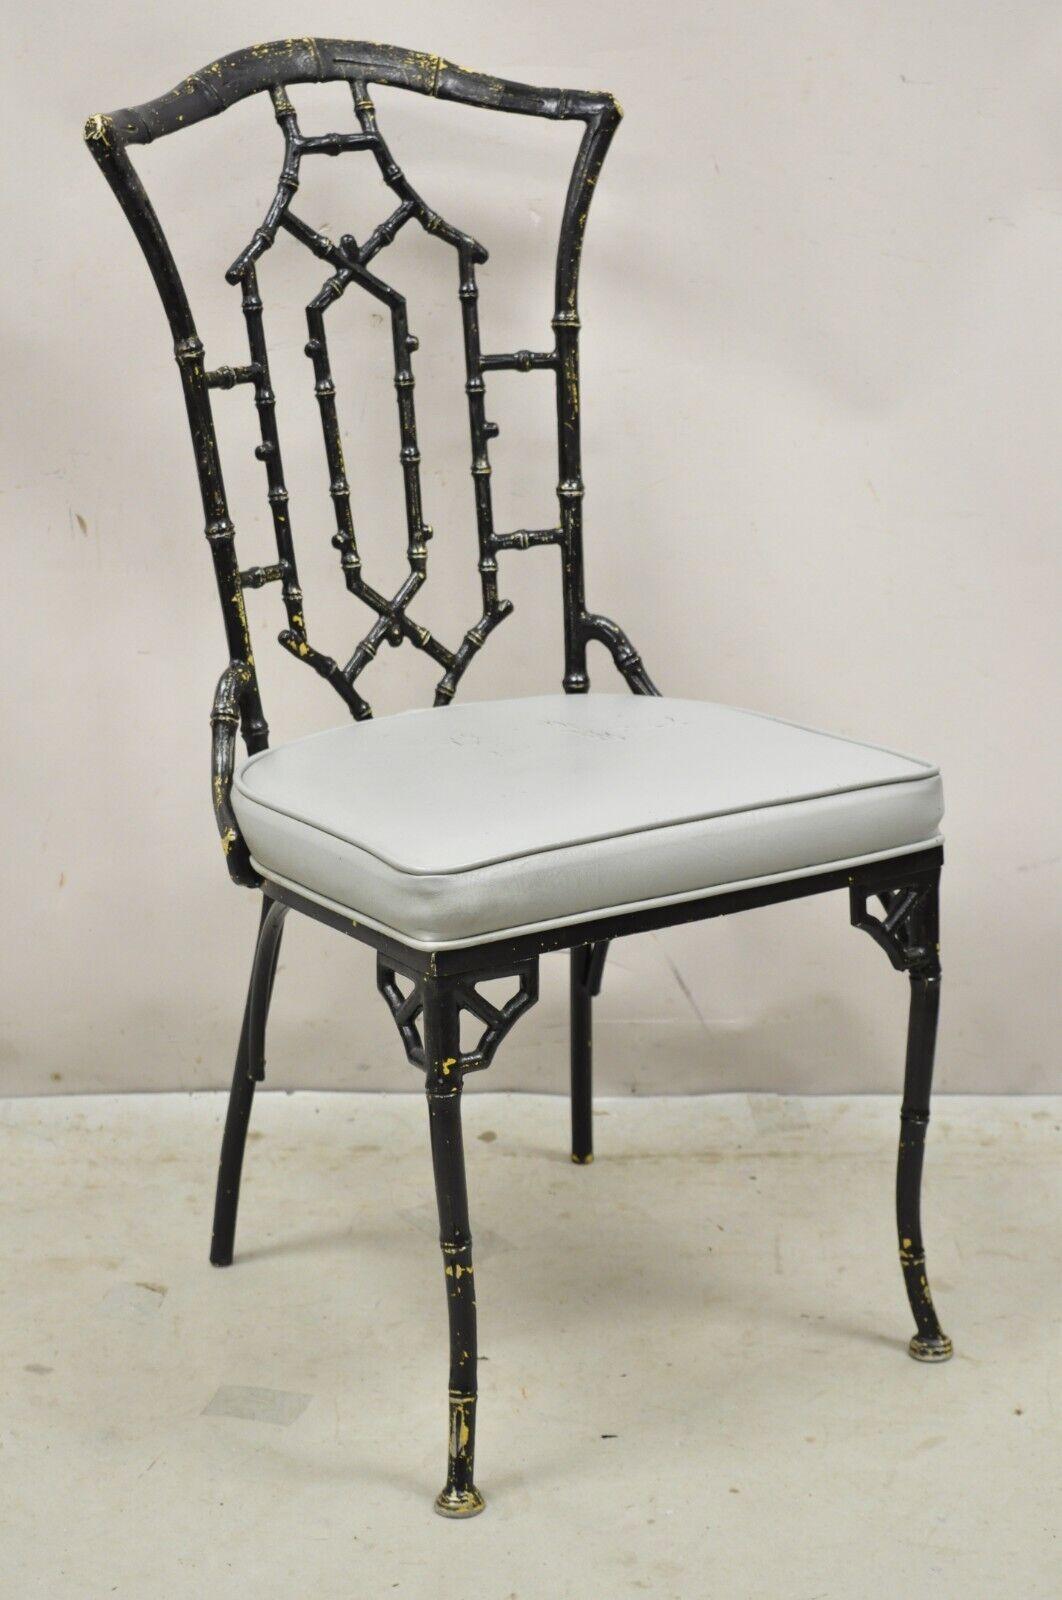 Vintage Cast Aluminum Faux Bamboo Black Painted Dining Chairs - Set of 4. Item features cast aluminum frames, distressed finish, very nice vintage set, great style and form. Circa Mid to Late 20th Century. Measurements: 38